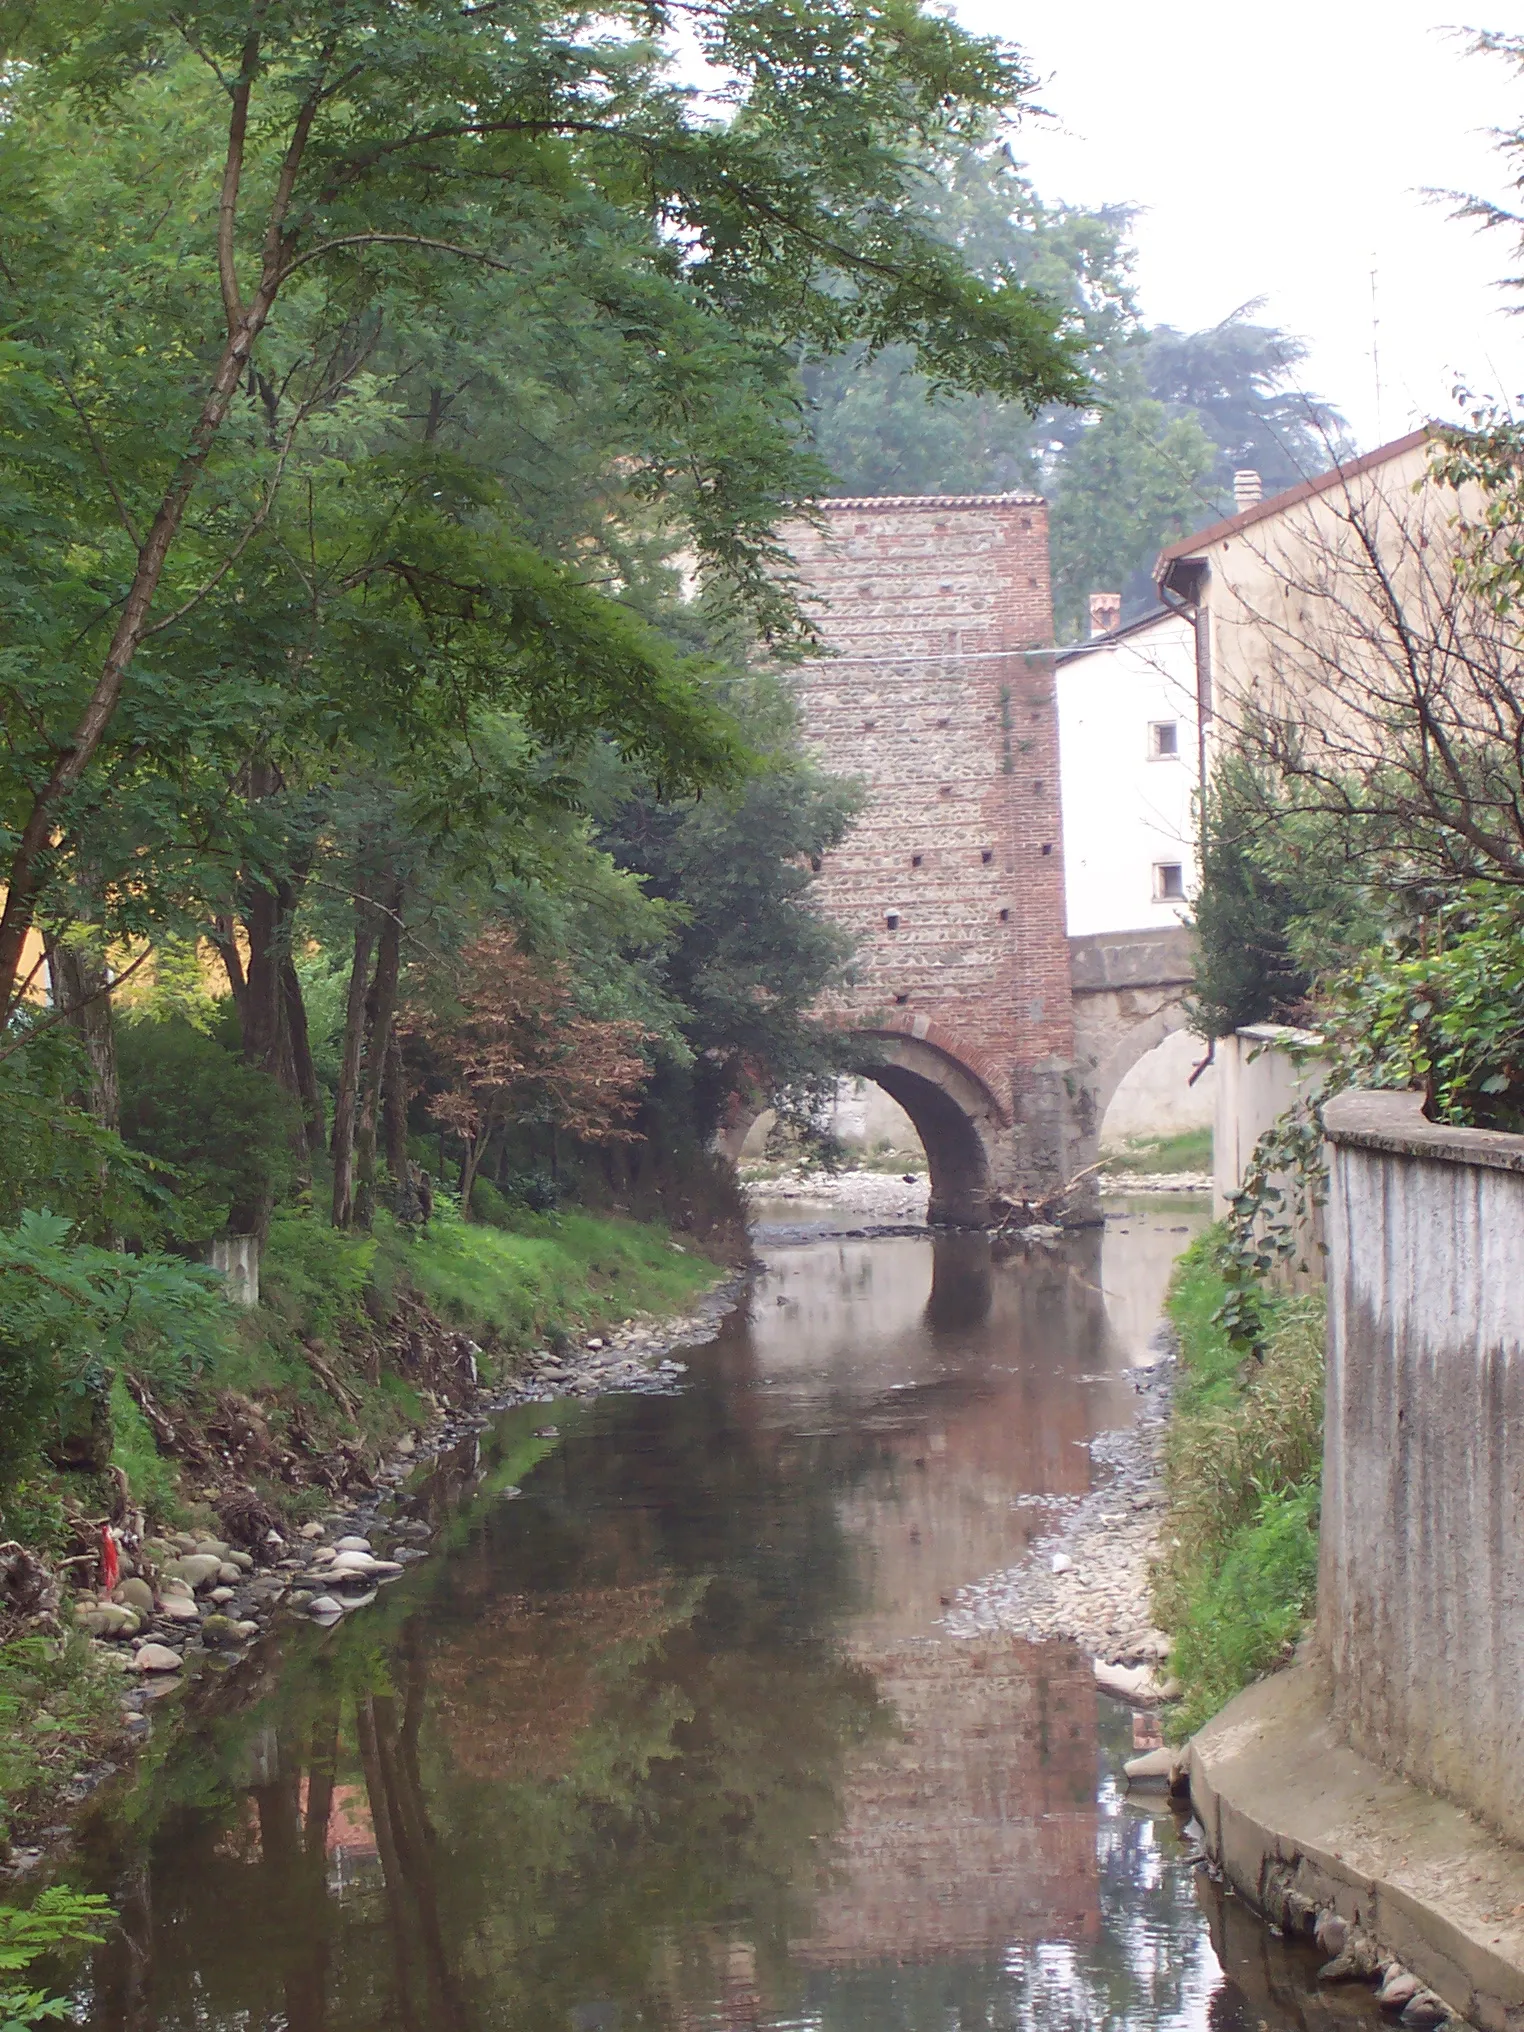 Photo showing: The river Molgora in Vimercate/Italy.